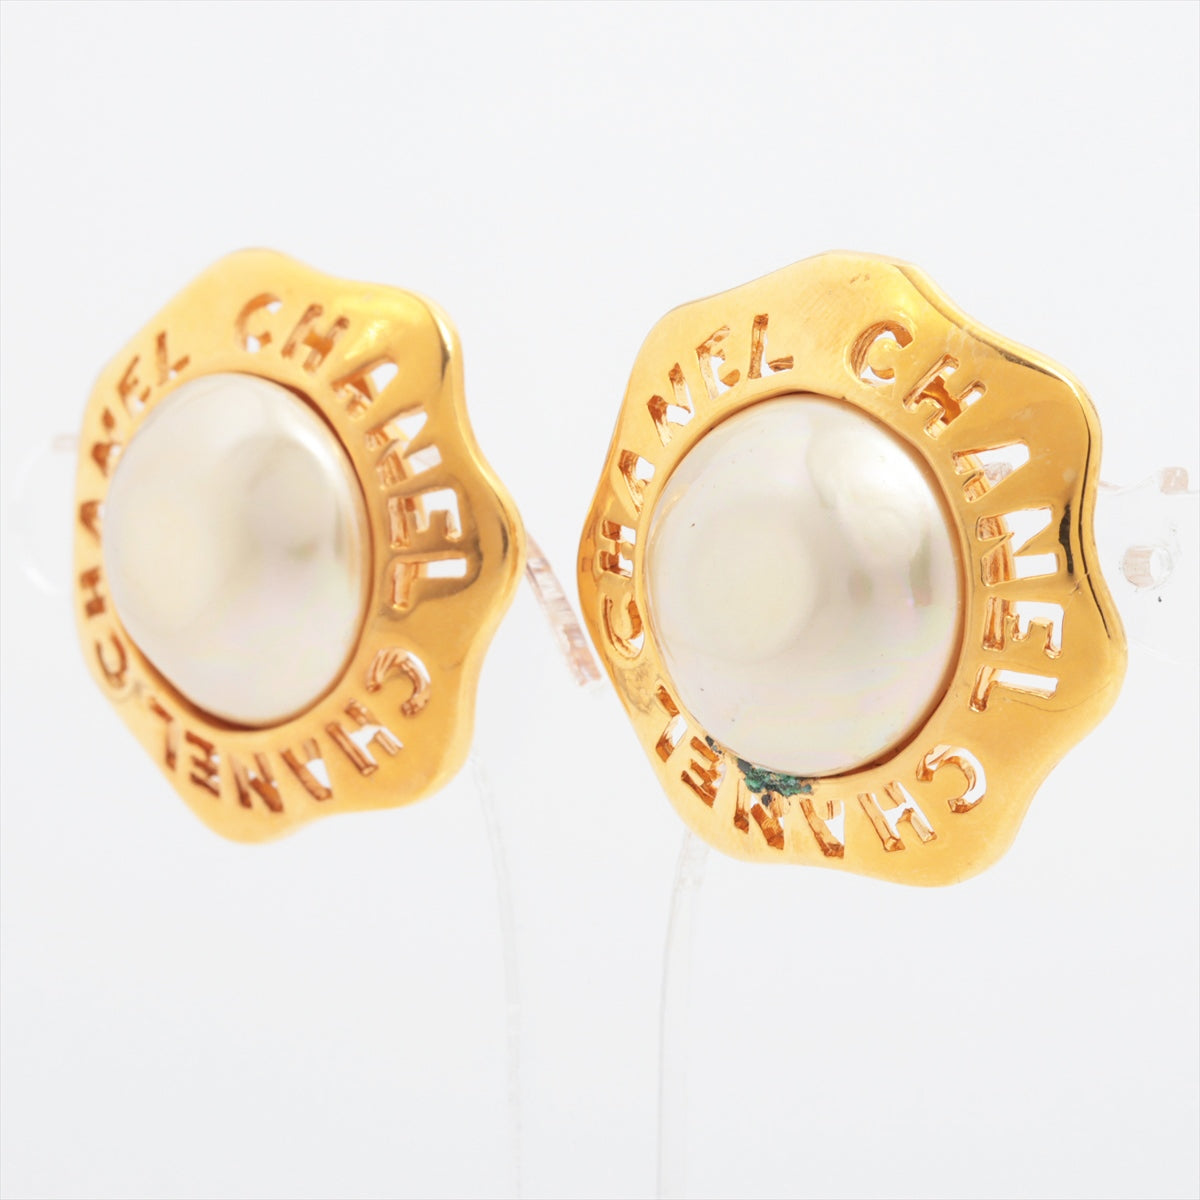 Chanel Logo 2356 Earrings (for both ears) GP x Imitation pearl Gold Wears Stained Oxidation staining Discoloration